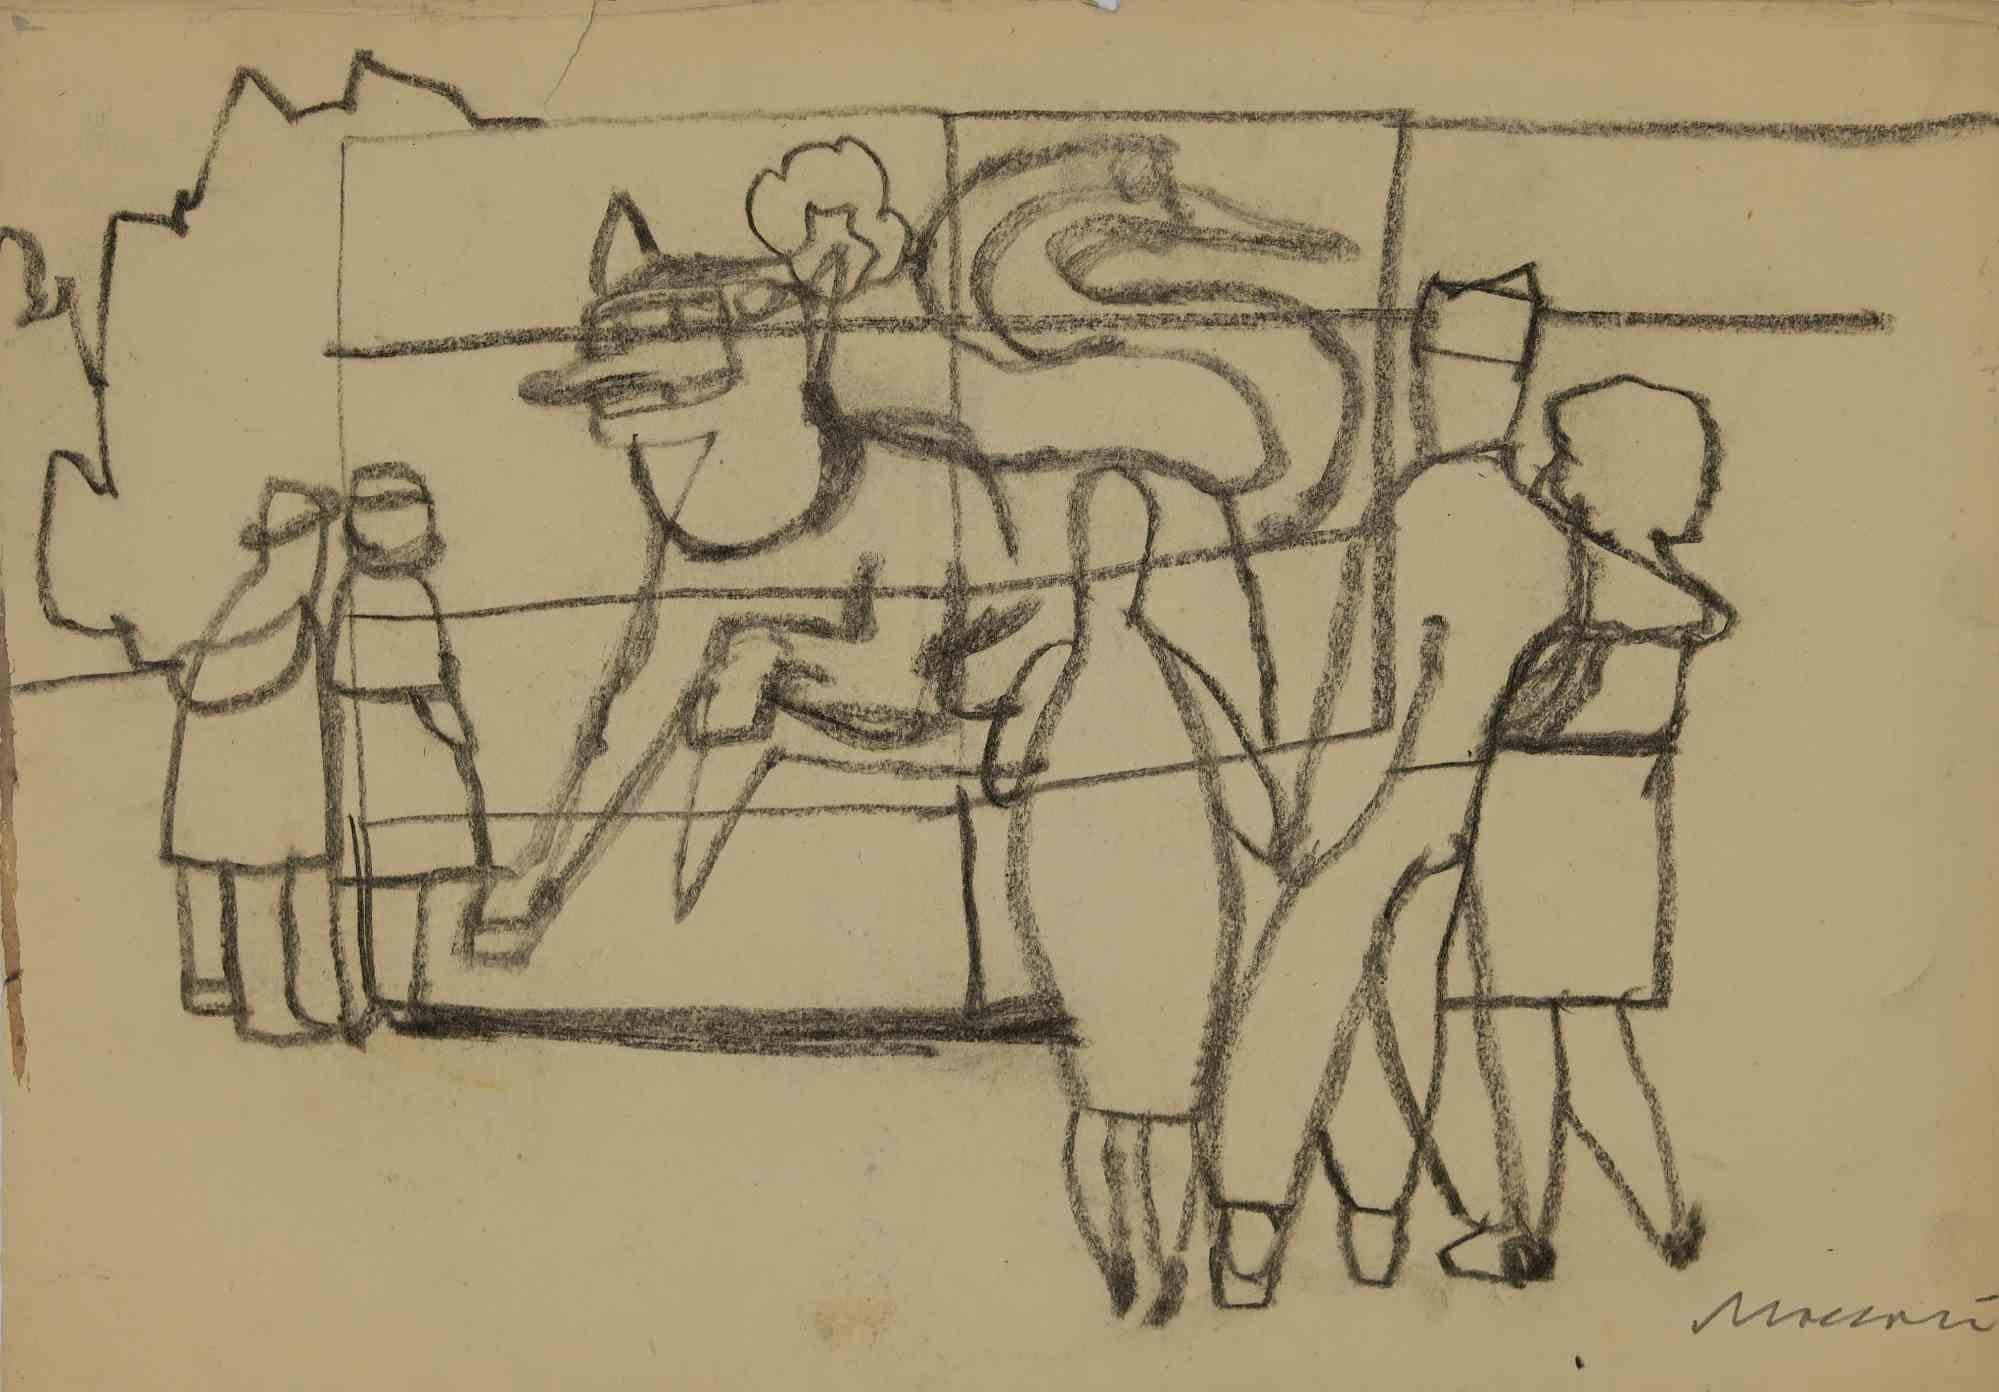 At the Zoo is an original Charcoal Drawing realized by Mino Maccari in mid-20th century.

Good condition on a yellowed paper.

Hand-signed by the artist with pencil.

Mino Maccari (1898-1989) was an Italian writer, painter, engraver and journalist,